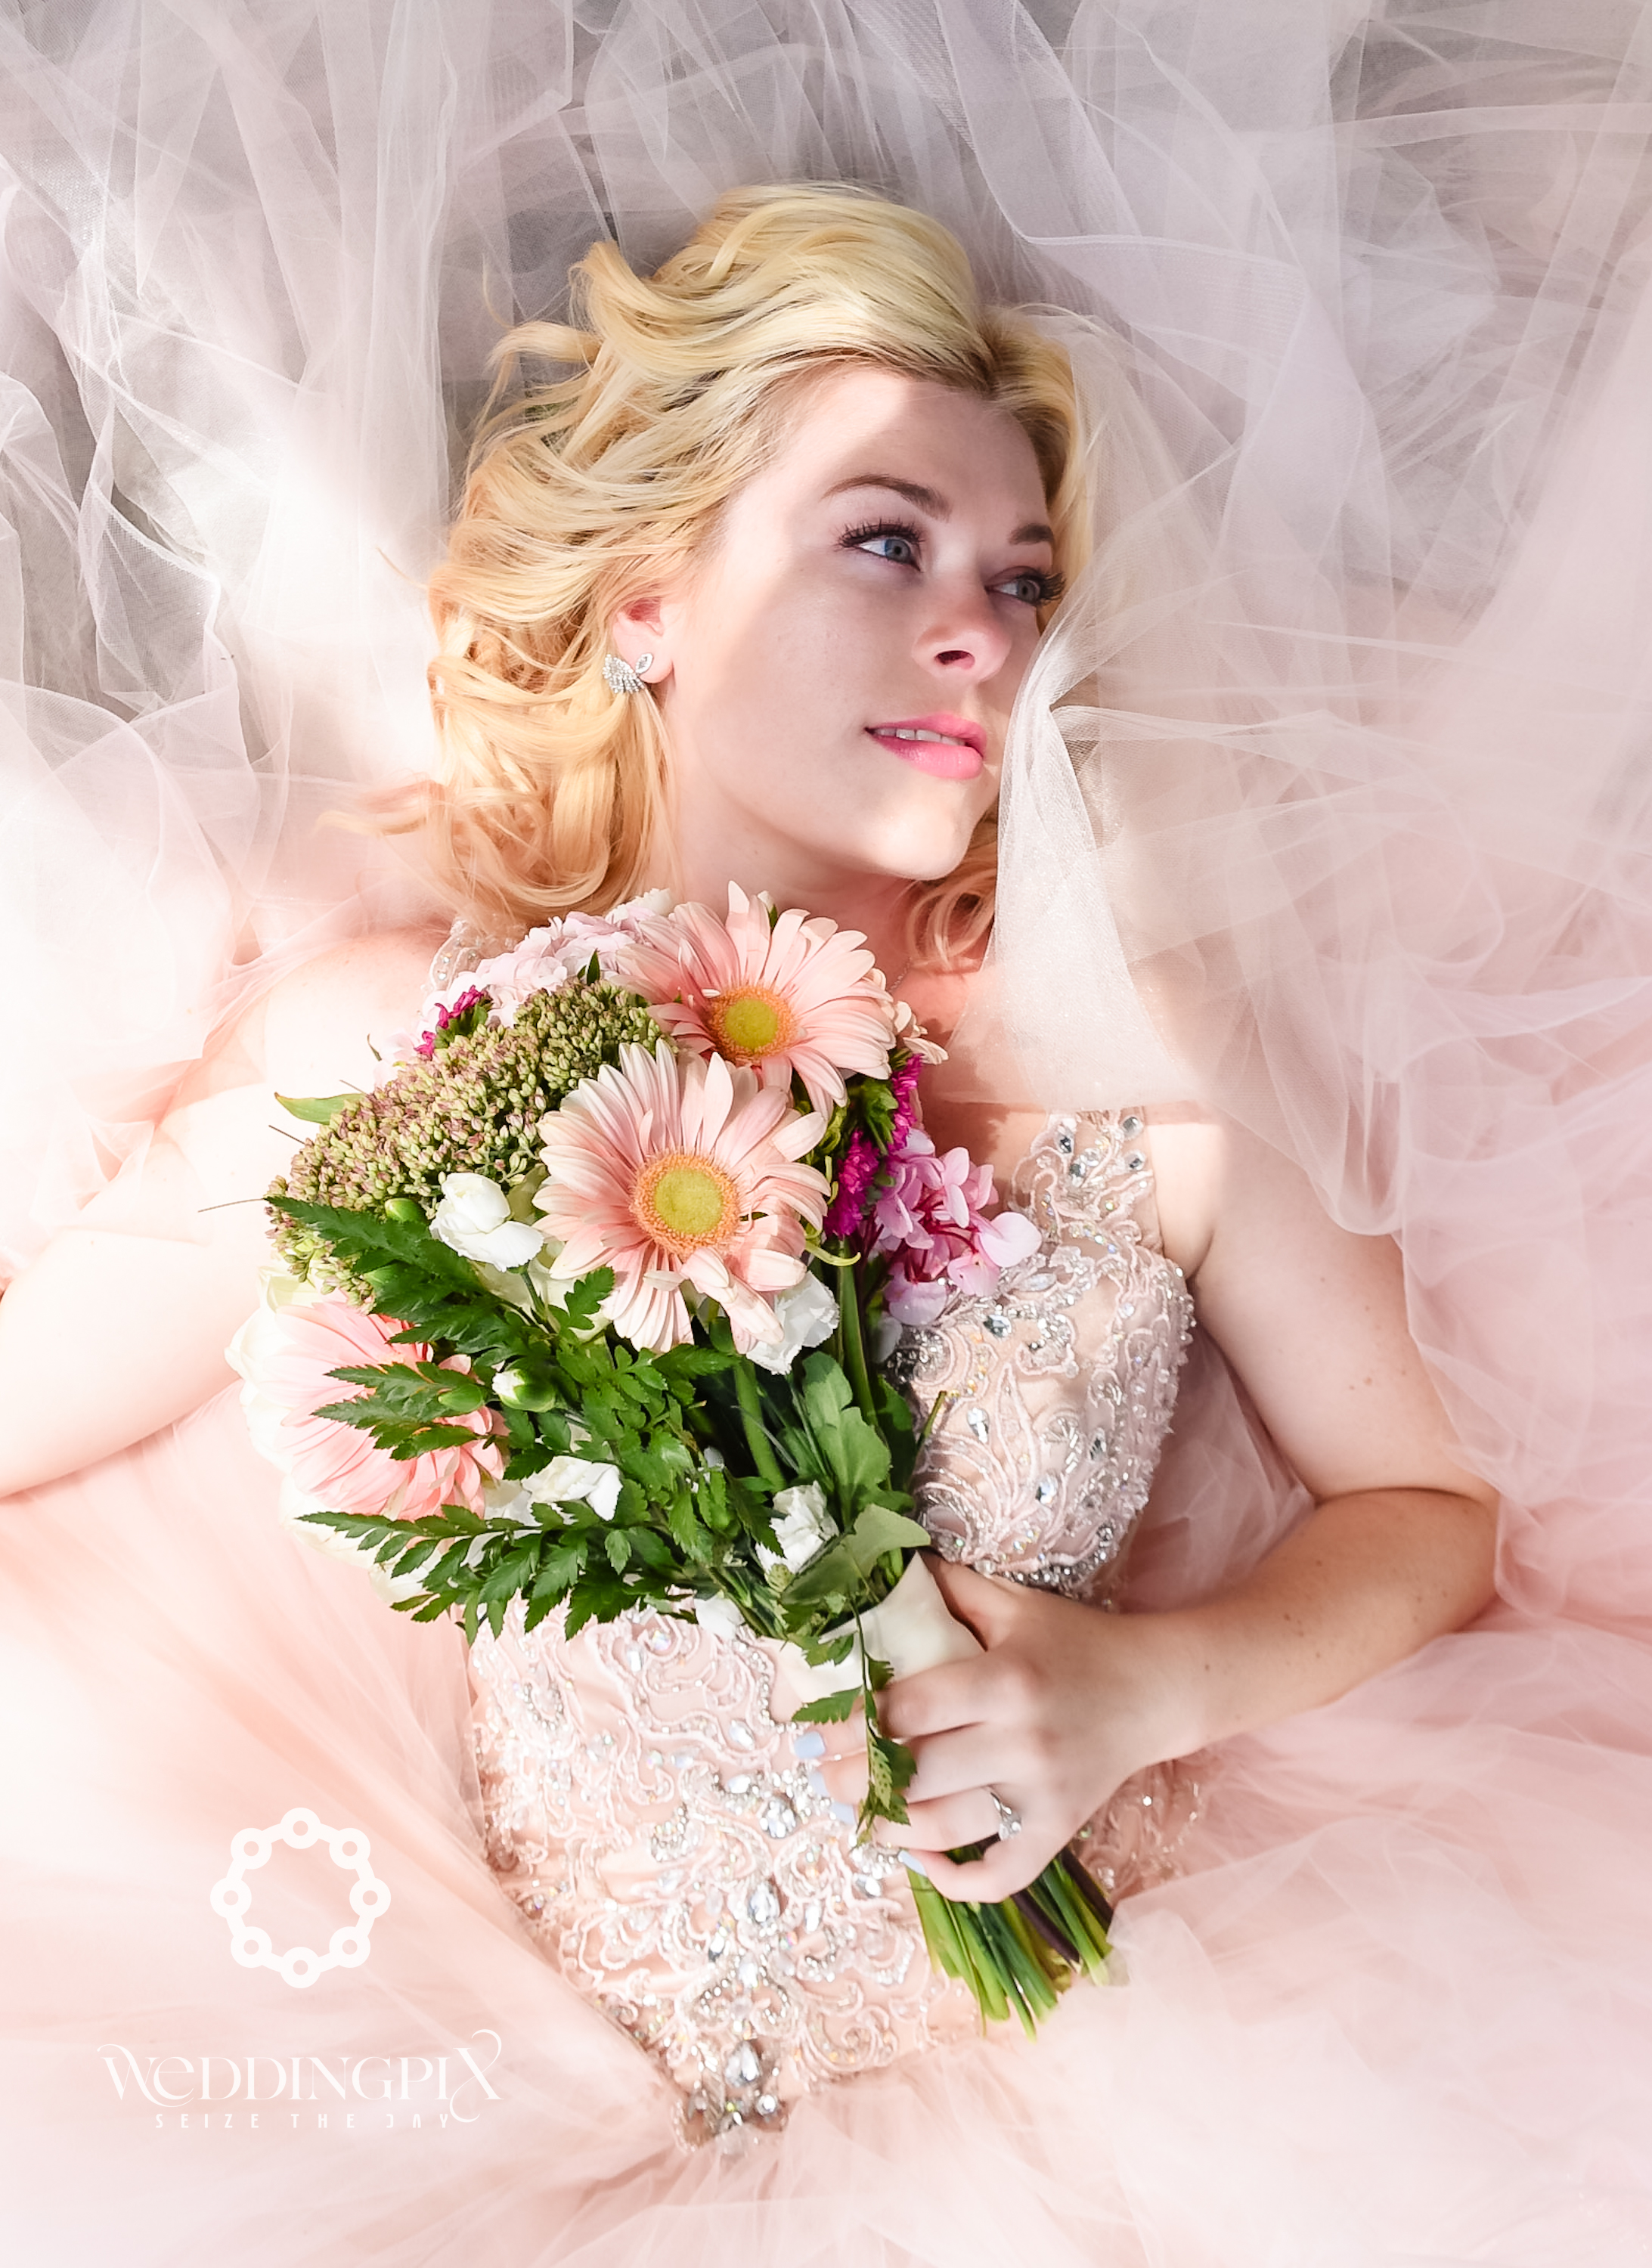 Kitchener-Waterloo bride poses for creative photographer with beautiful pink wedding bouquet and wedding dress